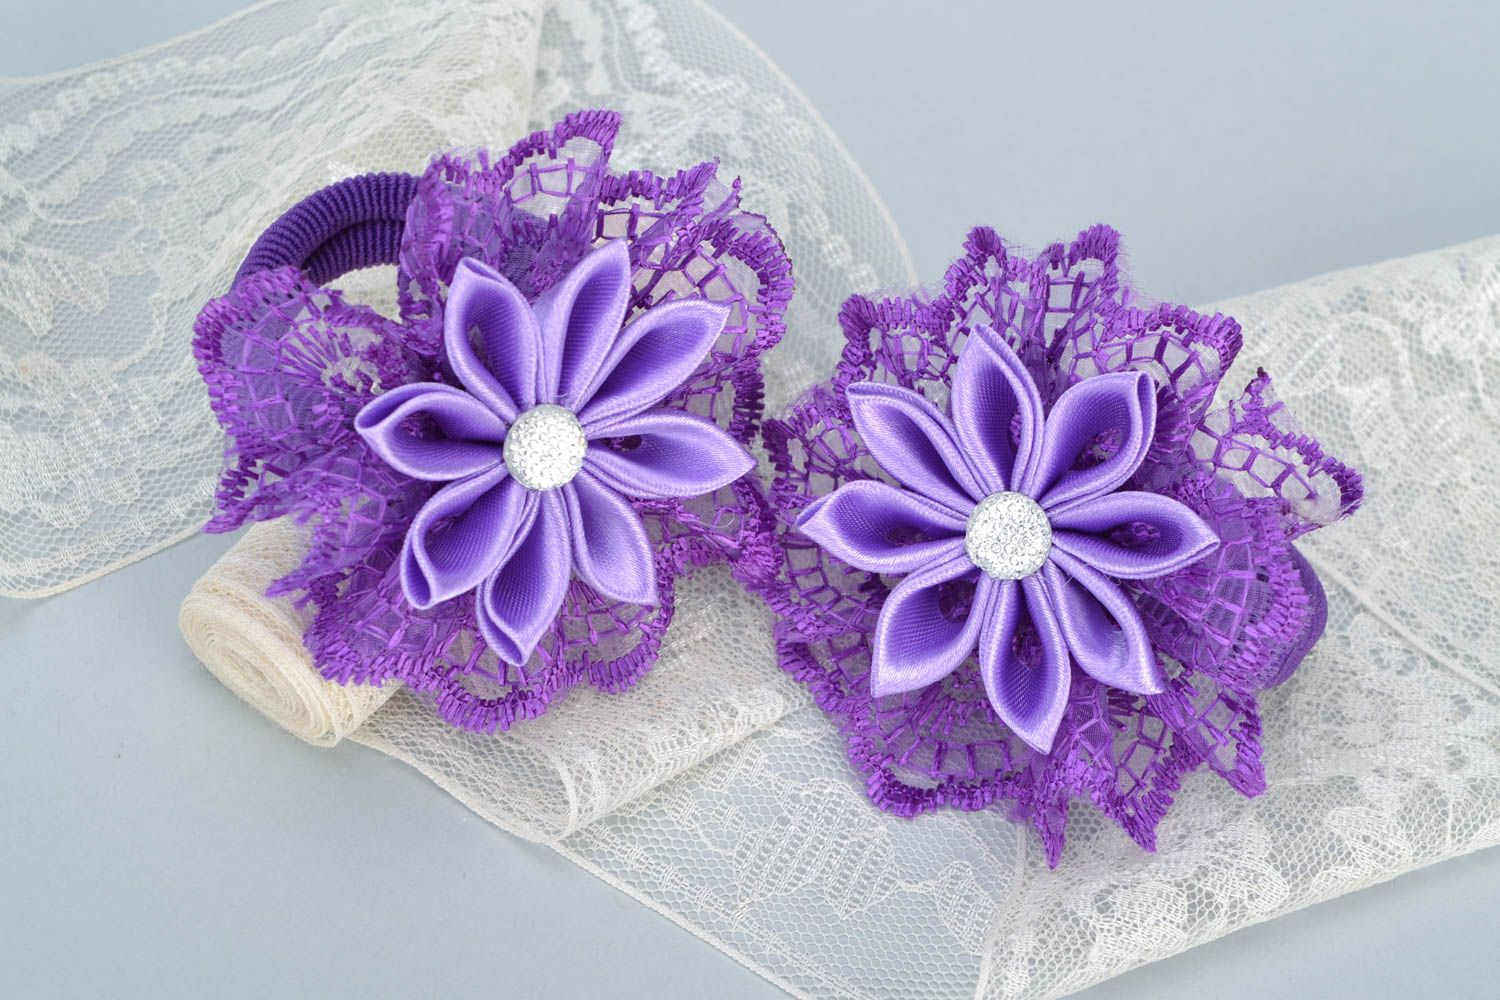 Handmade purple scrunchies with flowers made of satin ribbons kanzashi technique 2 pieces photo 1